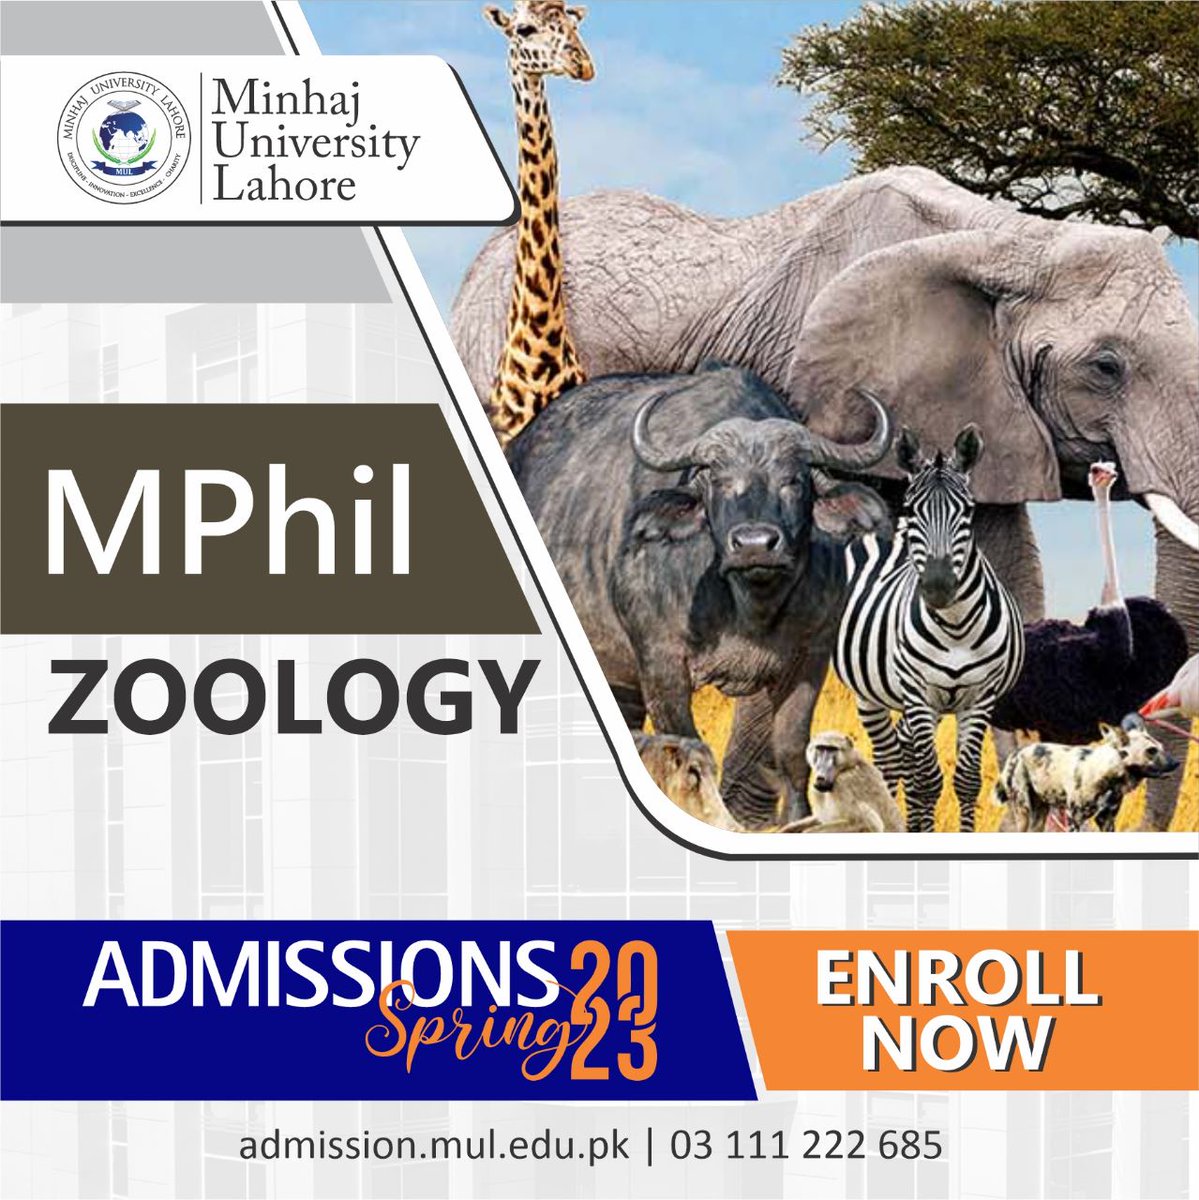 ADMISSIONS OPEN SPRING 2023
MPhil Zoology
School of Zoology
For more details: 
mul.edu.pk/admissions-ope…
Apply Online:
admission.mul.edu.pk
#AdmissionsOpenSpring2023
#AdmissionsSpring2023
#AdmissionsOpen2023
#Admissions2023
#2023Admissions 
#AdmissionsOpen
#UniversityAdmissions